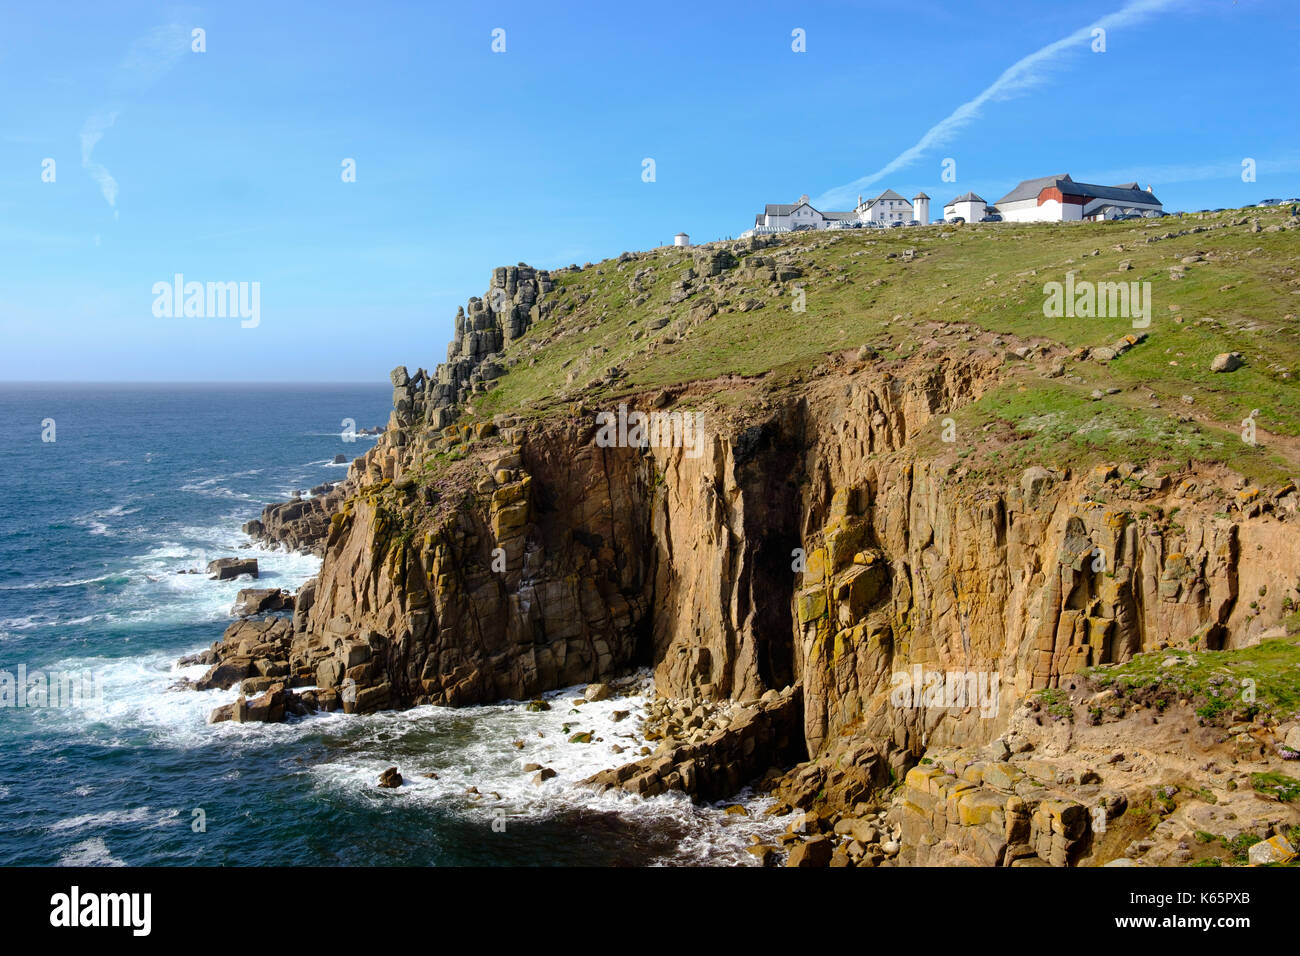 Cliffs, Land's End, Cornwall, England, Great Britain Stock Photo